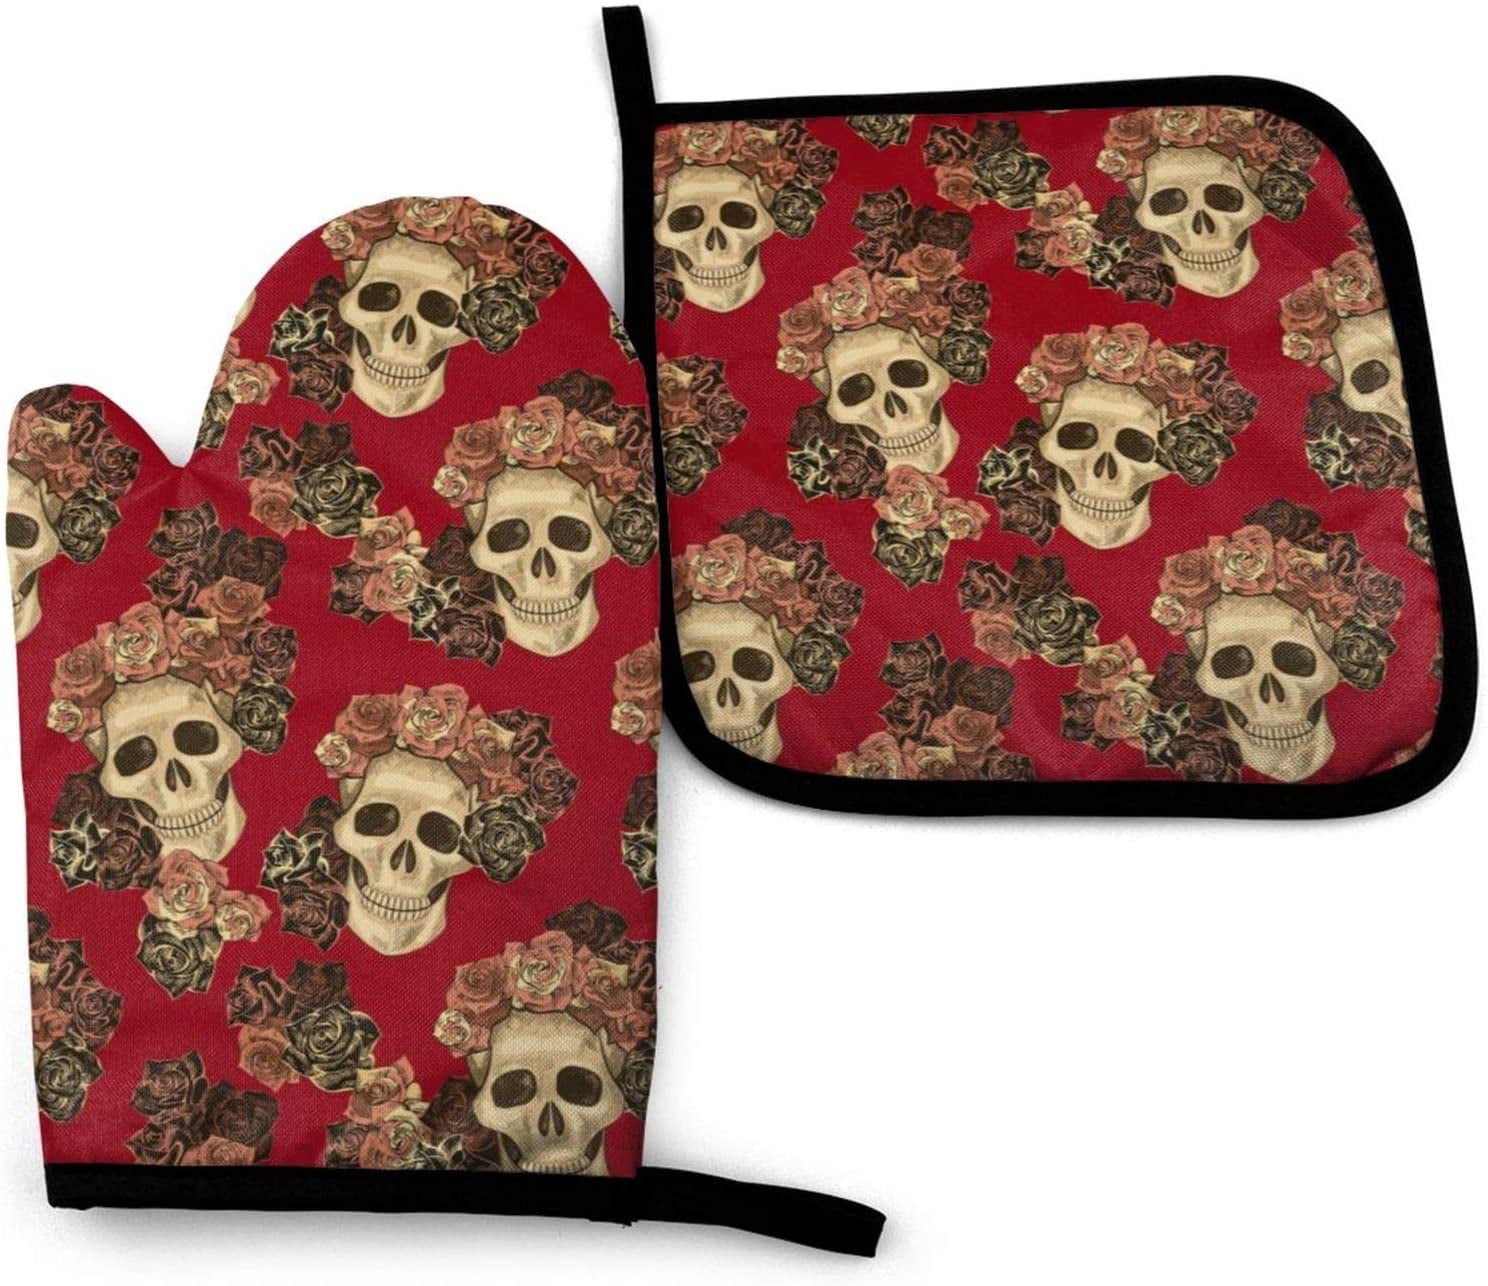 Antvinoler Oven Mitts Oven Gloves Heat Resistant Non-Slip Be Used for BBQ Cooking Baking Grilling-Scary Skull Horror Pot Holders for Kitchen